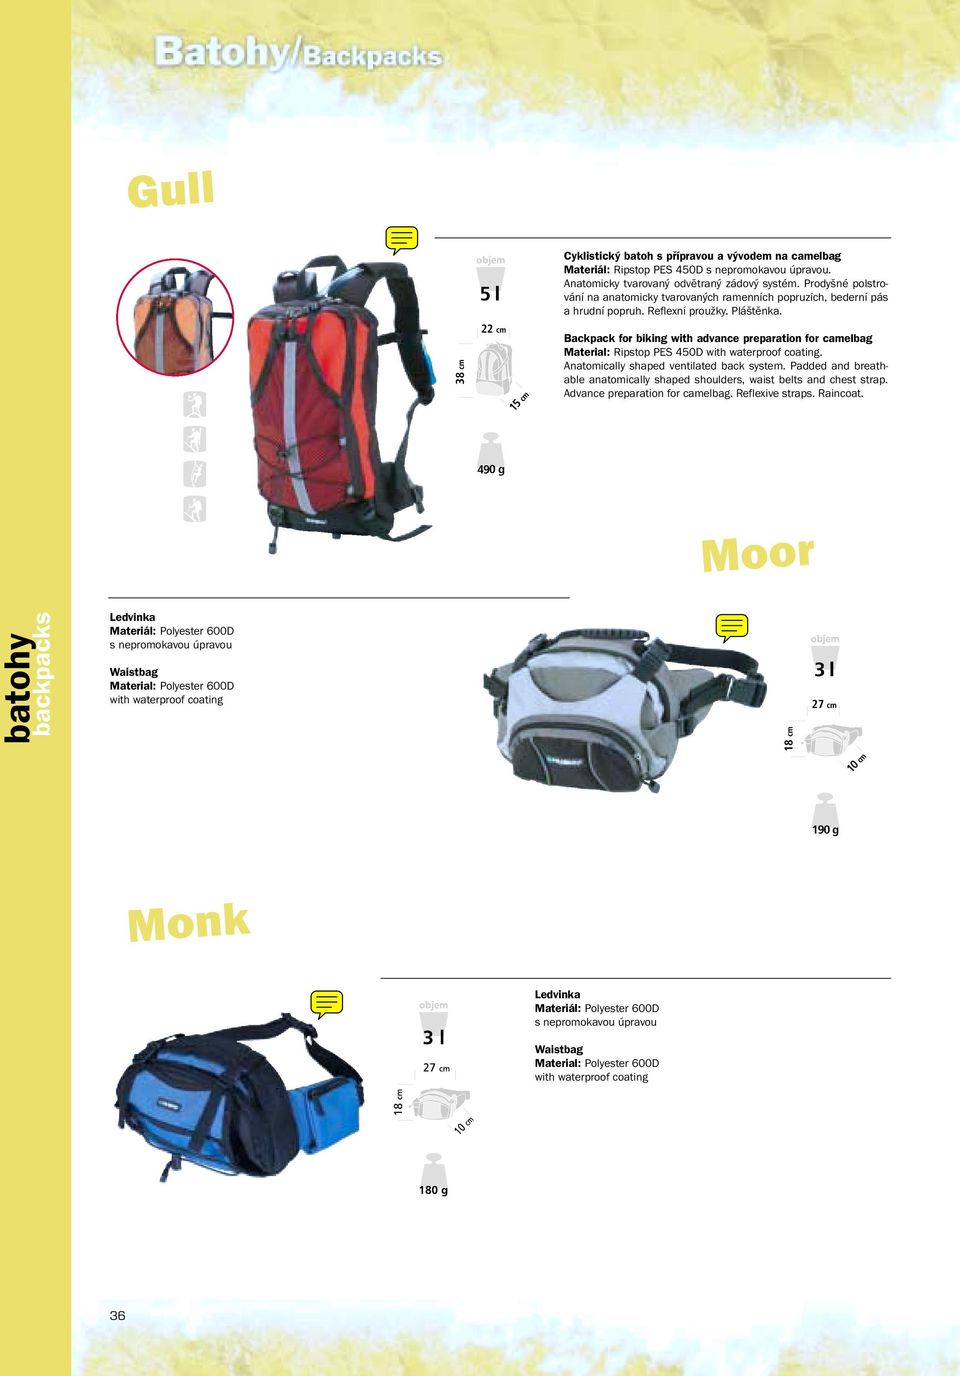 38 cm 22 cm 15 cm Backpack for biking with advance preparation for camelbag Material: Ripstop PES 450D with waterproof coating. Anatomically shaped ventilated back system.